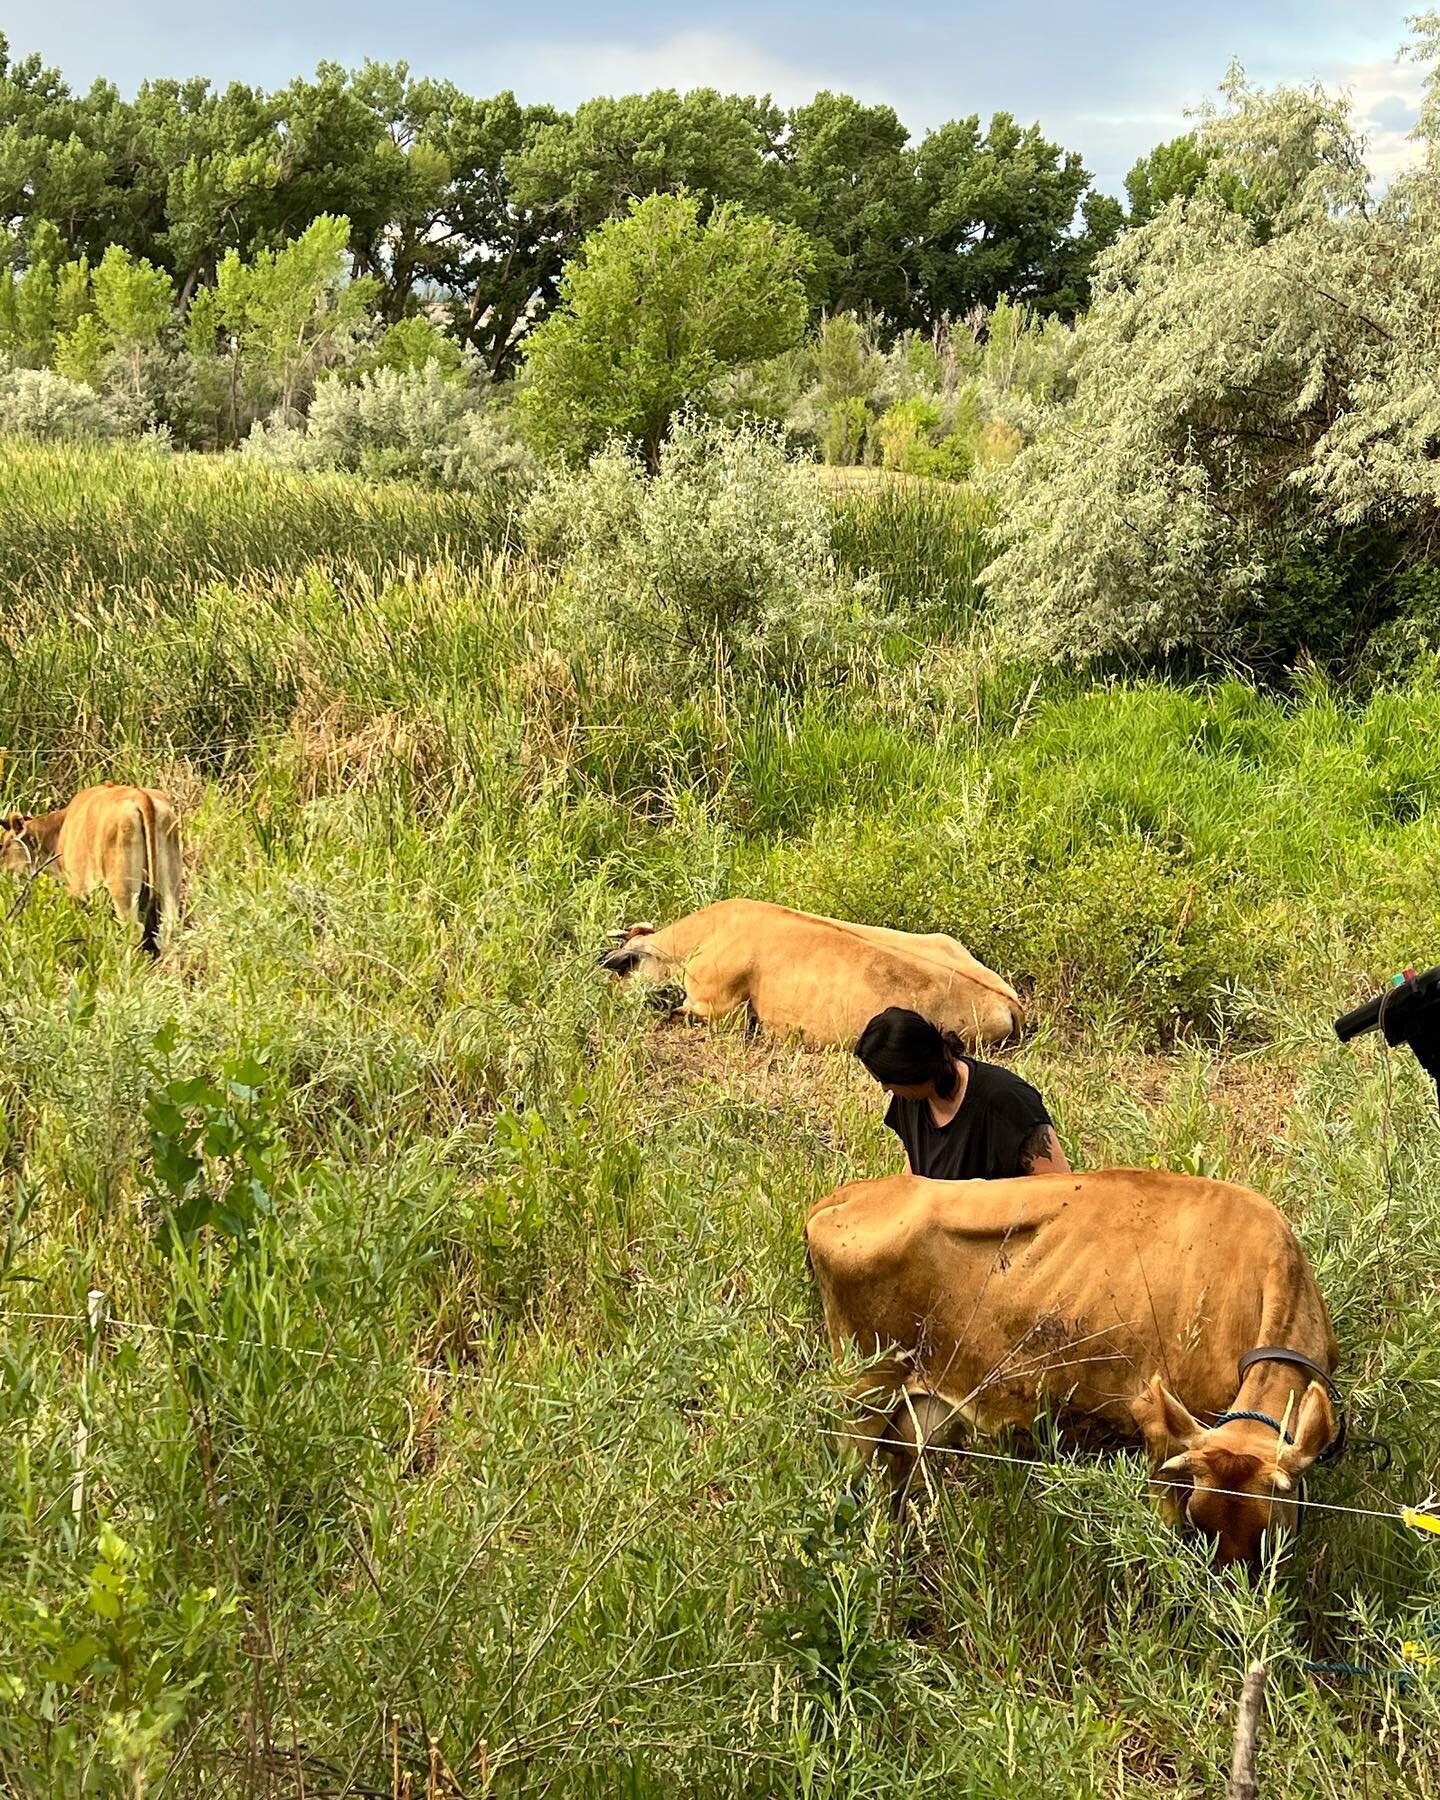 We are rotating the cows through paddocks in some of the wilder spots on the farm. This will give the pasture a chance to put on a good flush for a second cutting, and provide them with some nice shady grazing during the heatwave we are experiencing.